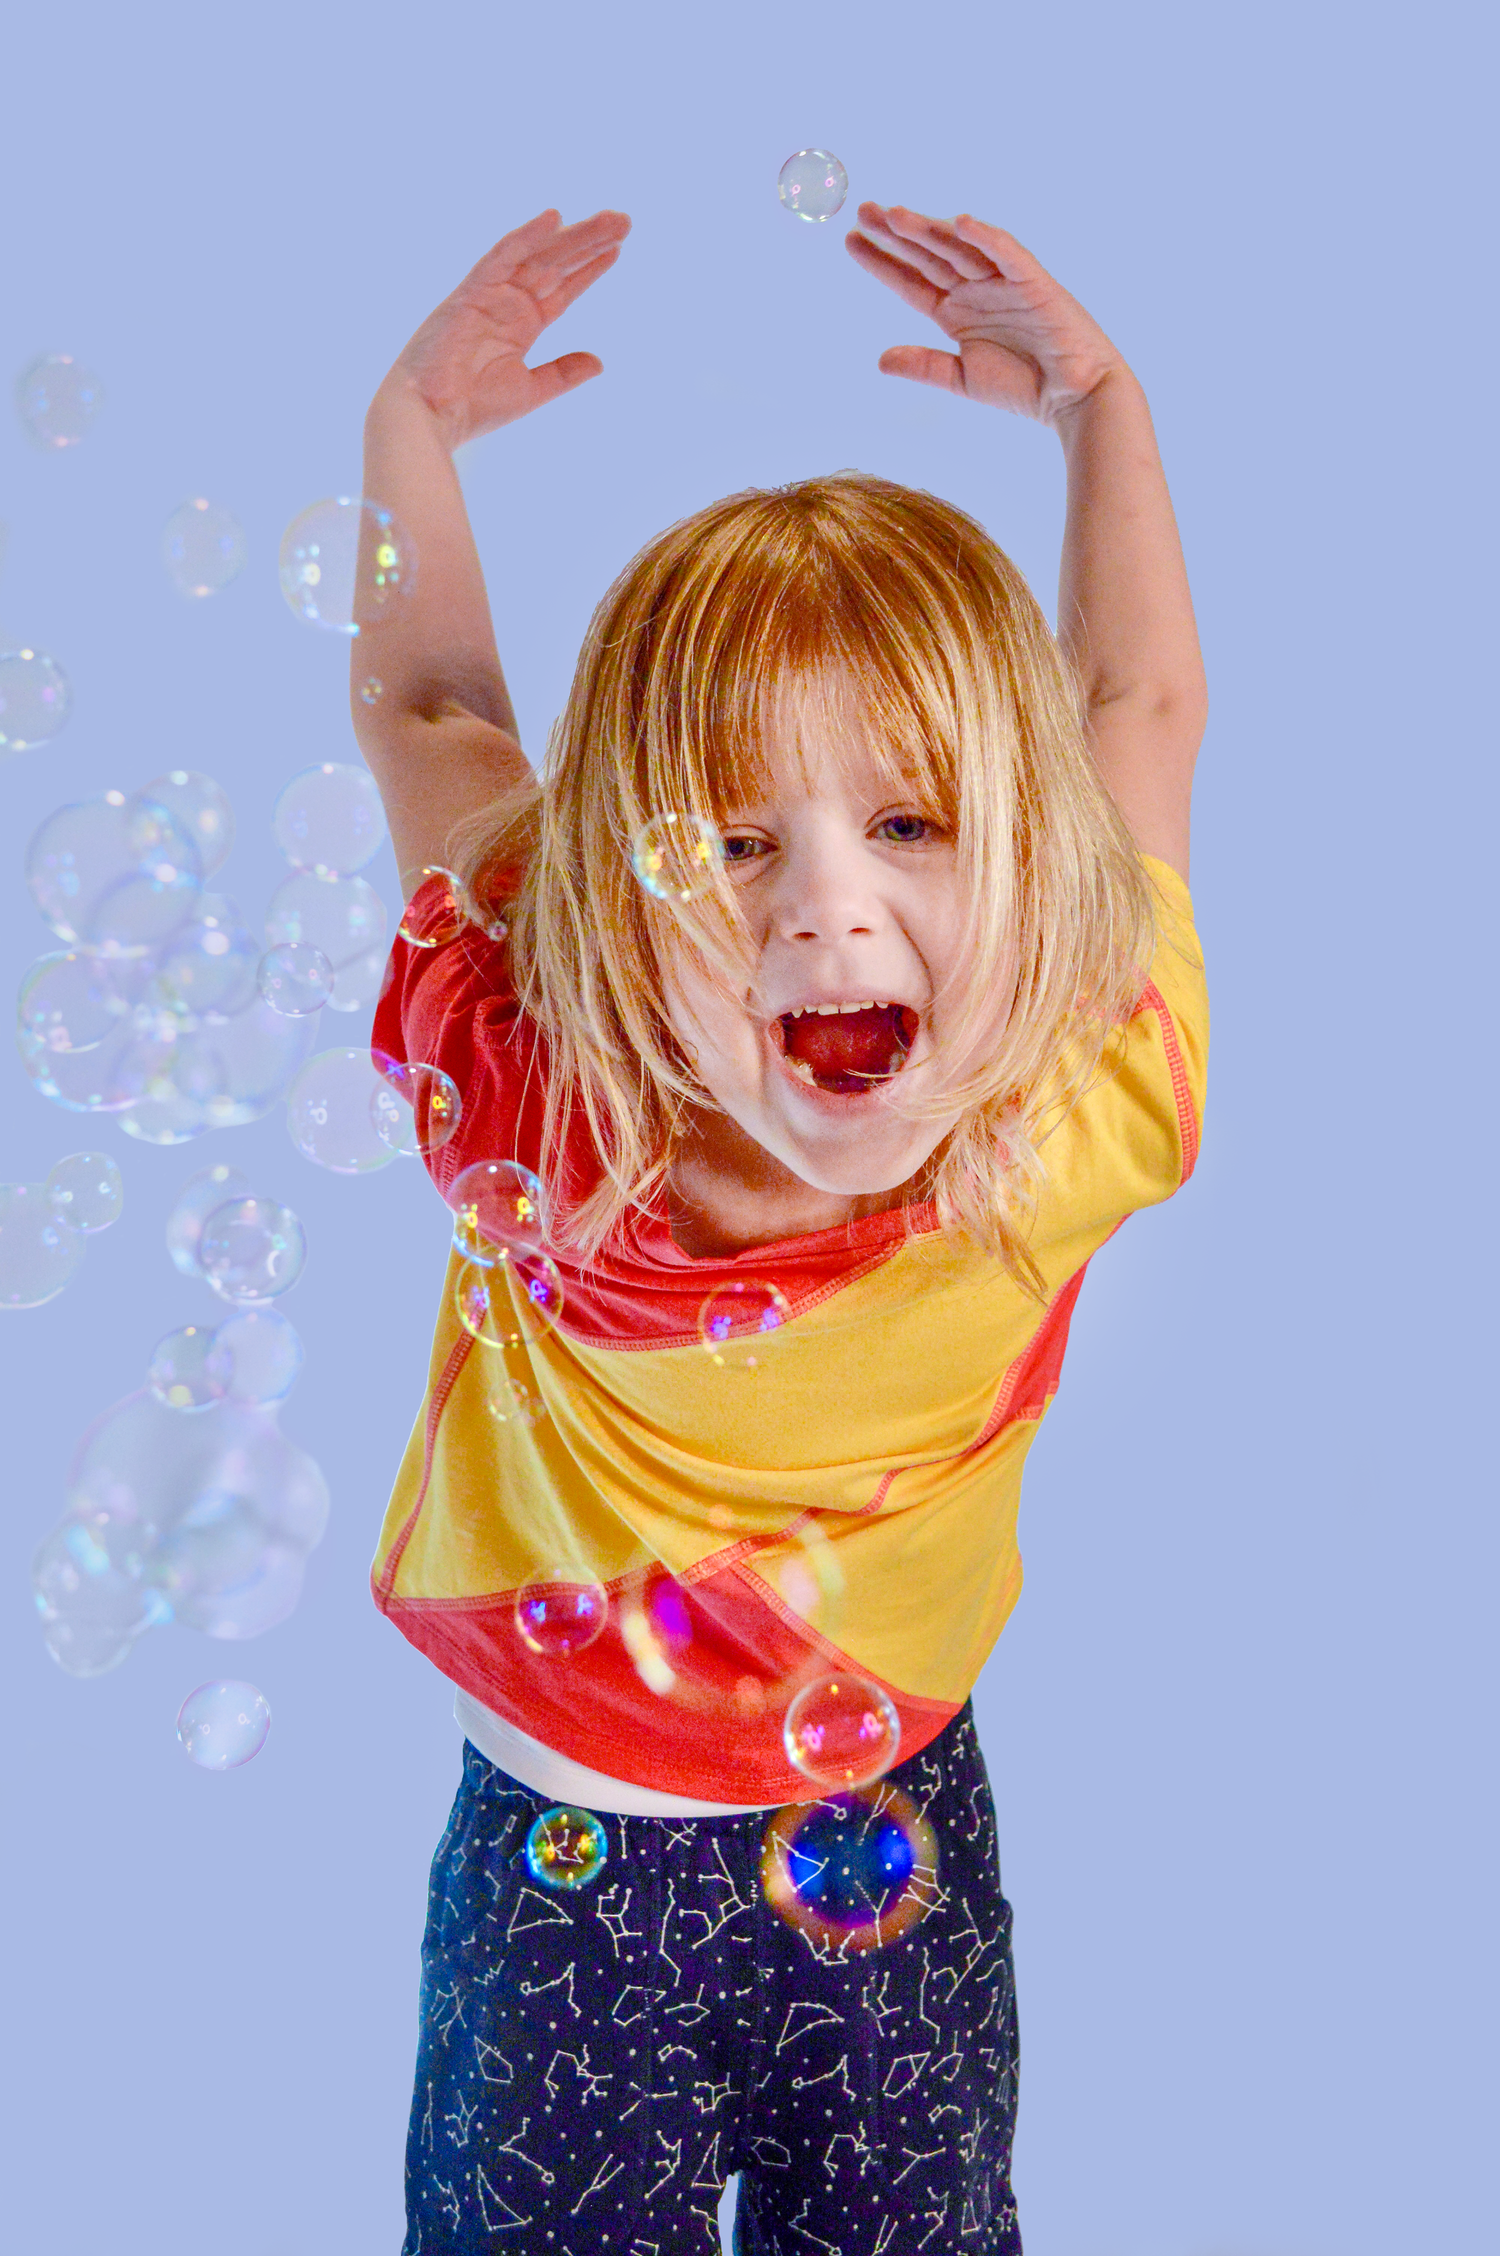 Autistic child in sensory friendly joggers and compression tee happy stimming with bubbles!